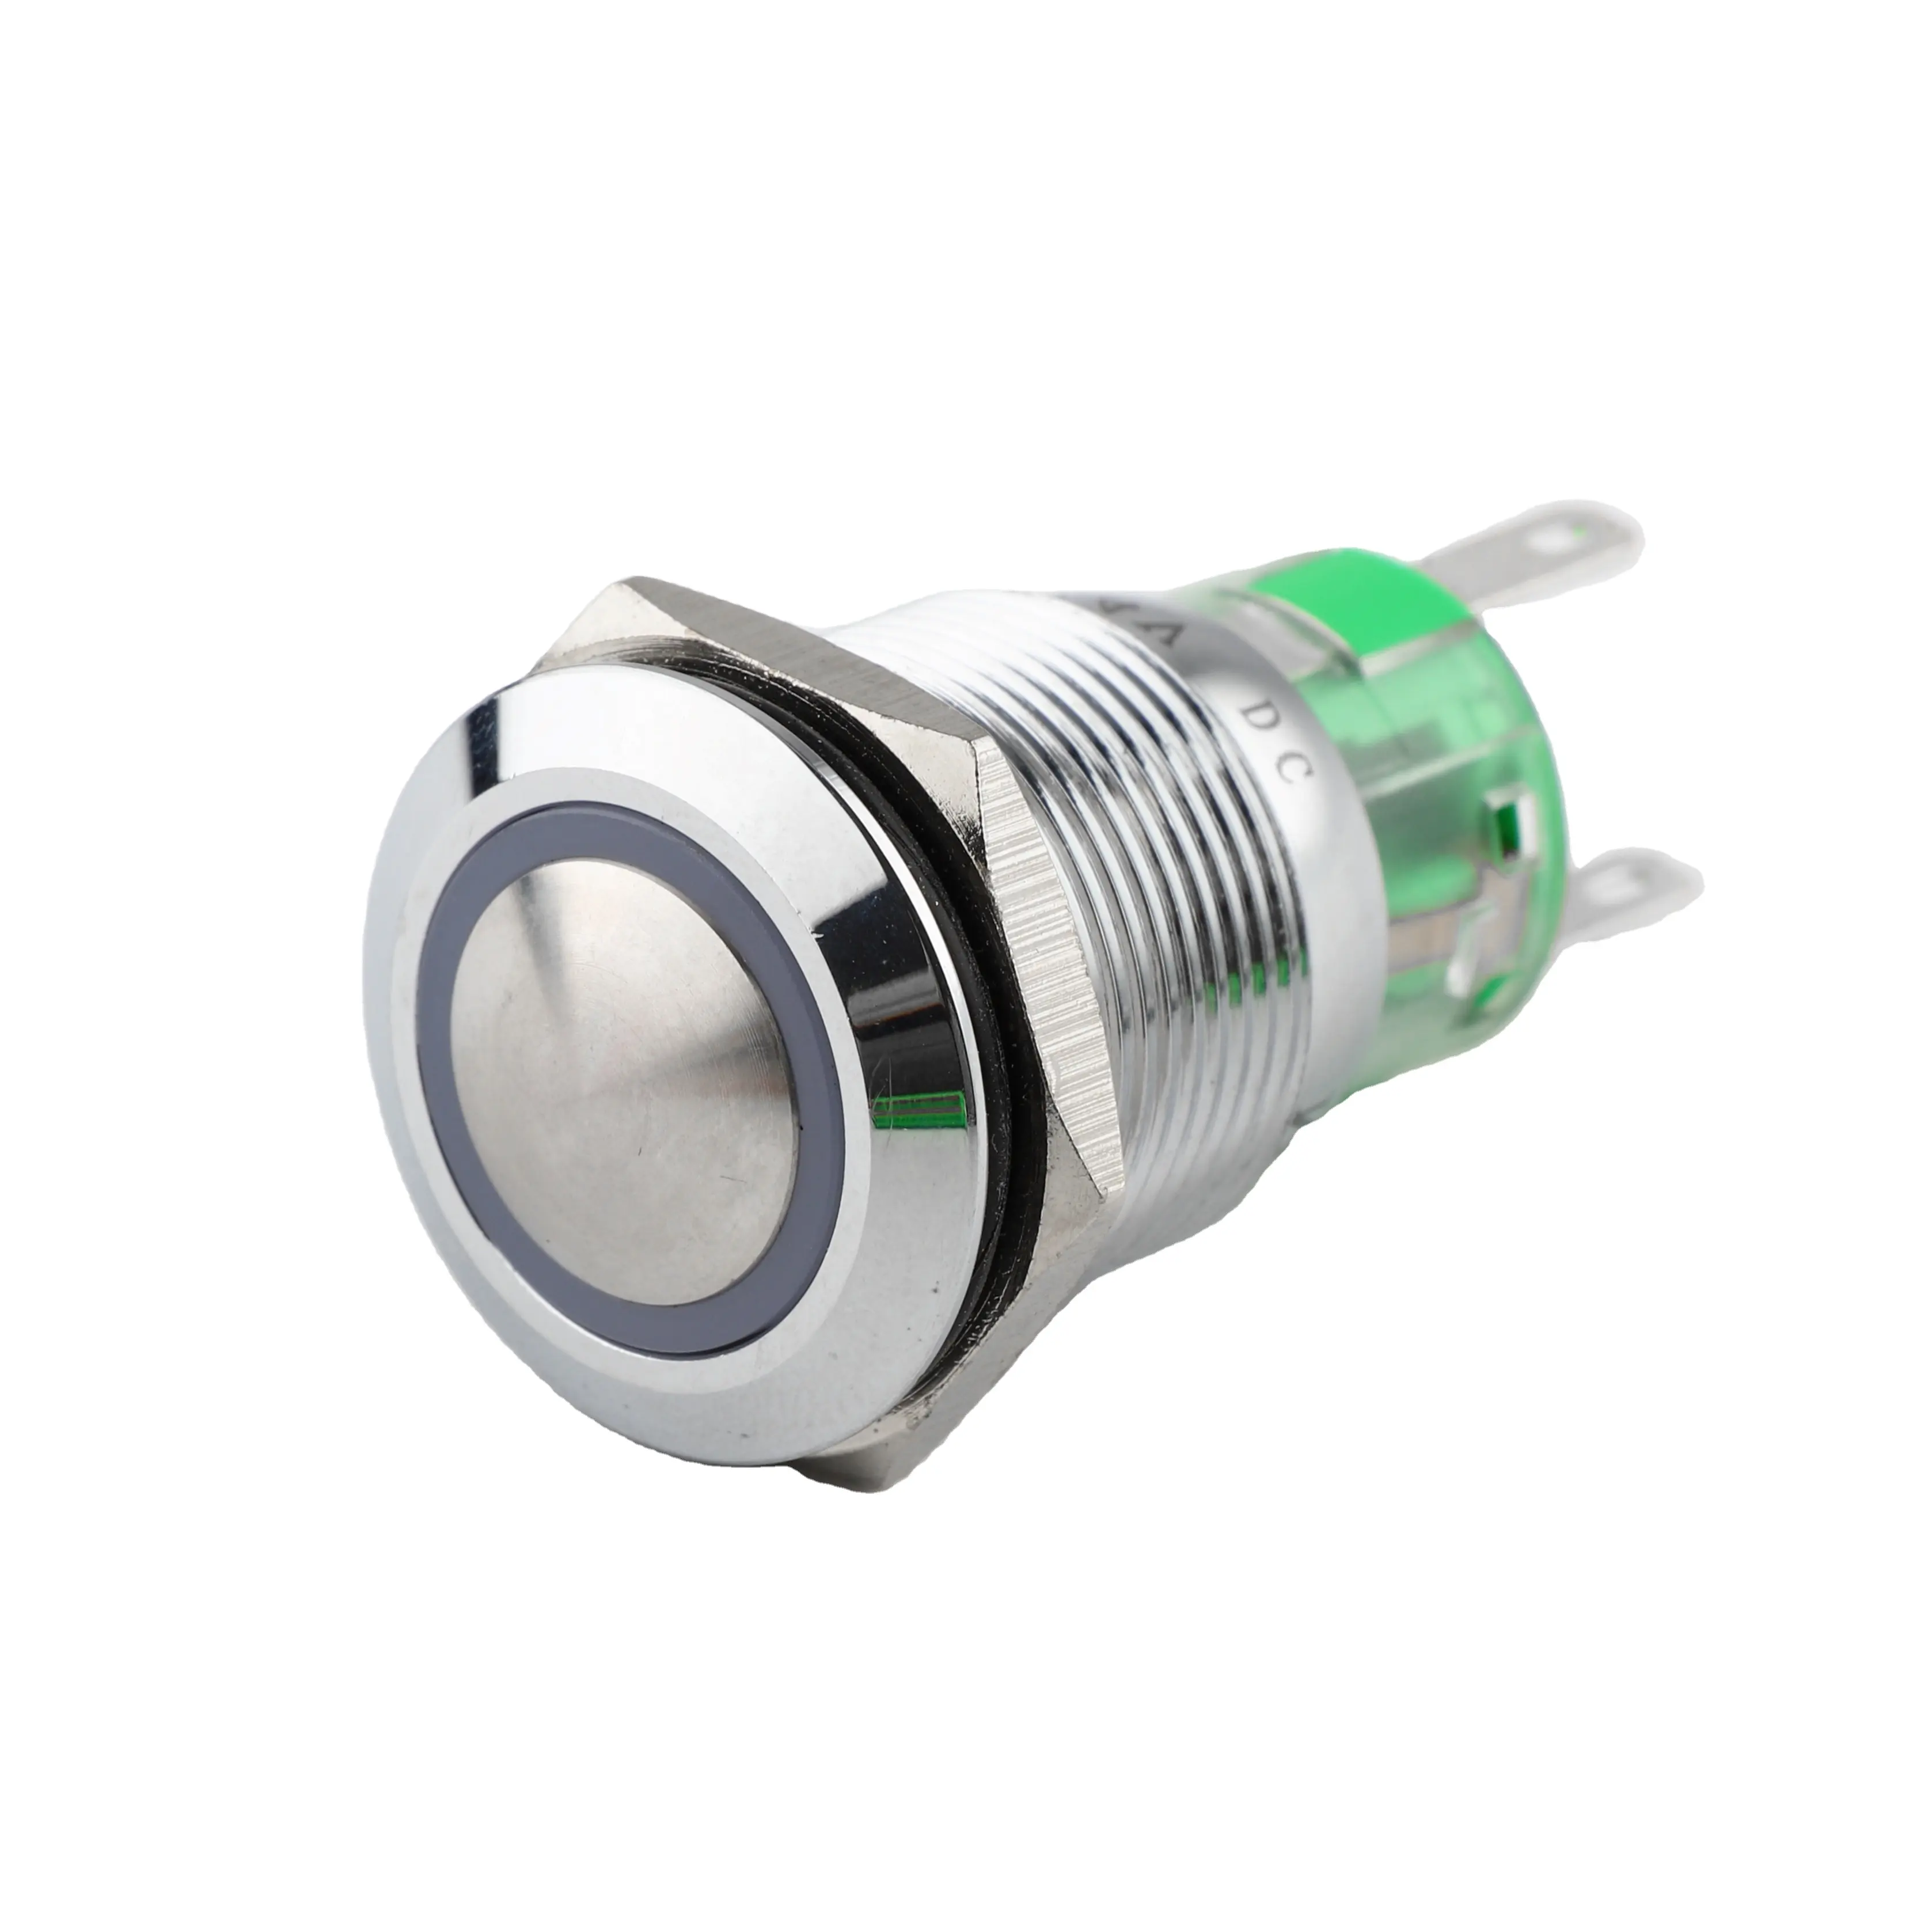 Momentary Led Push Button Switch XCE 19mm Domed Head Momentary 1NO1NC Stainless Steel Metal Push Button Switch With Blue Ring LED 12V 24V Self-reset Waterproof